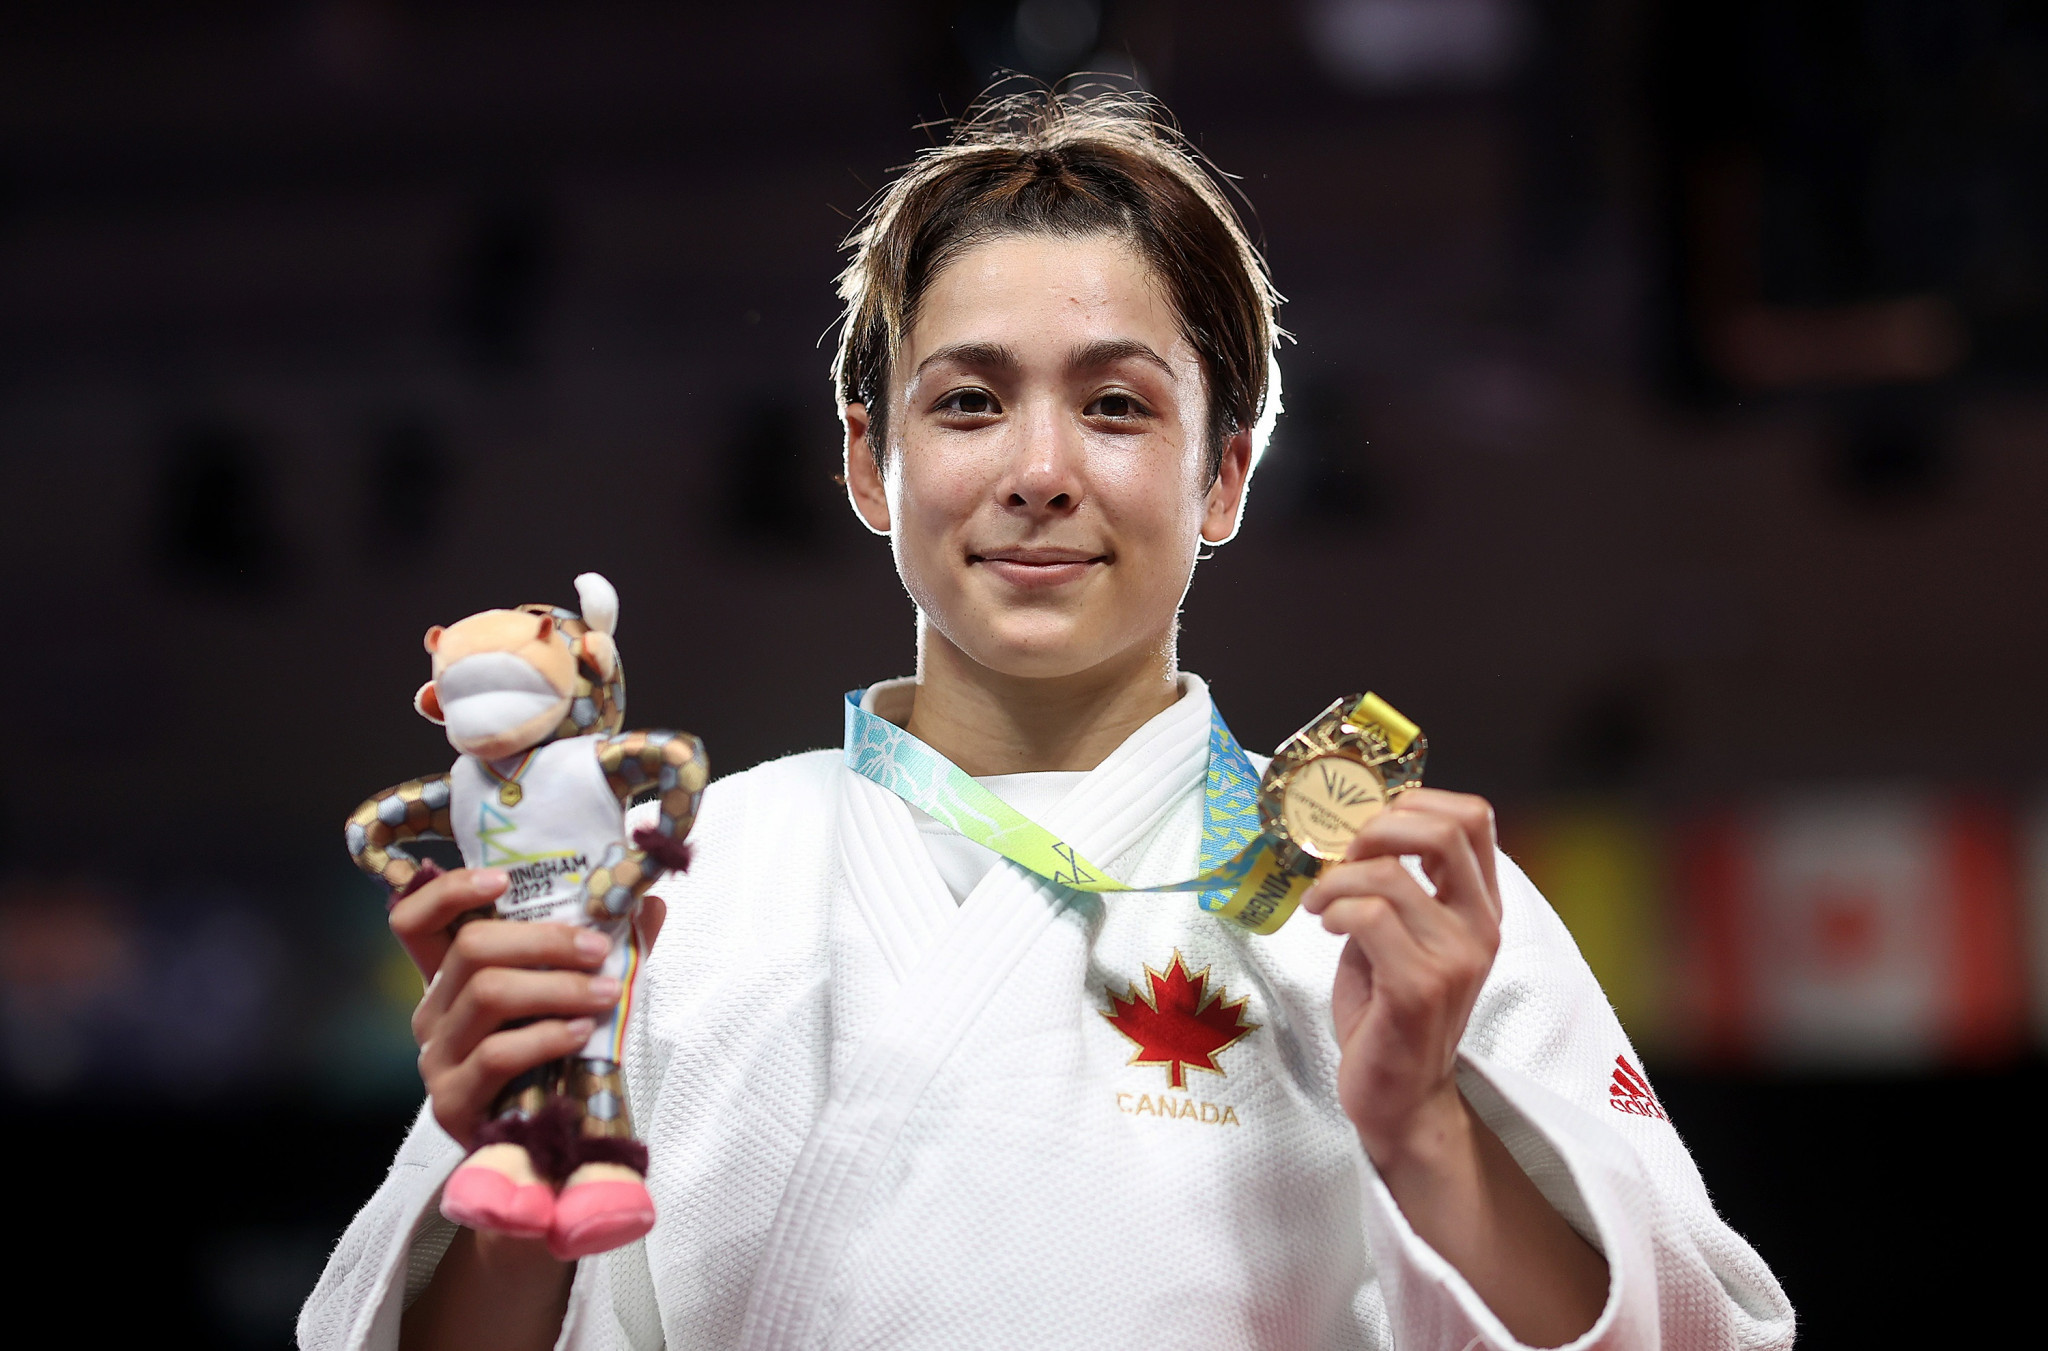 Canada's Christa Deguchi had to dig deep to beat England's Acelya Toprak in the women’s under-57kg gold medal match ©Getty Images